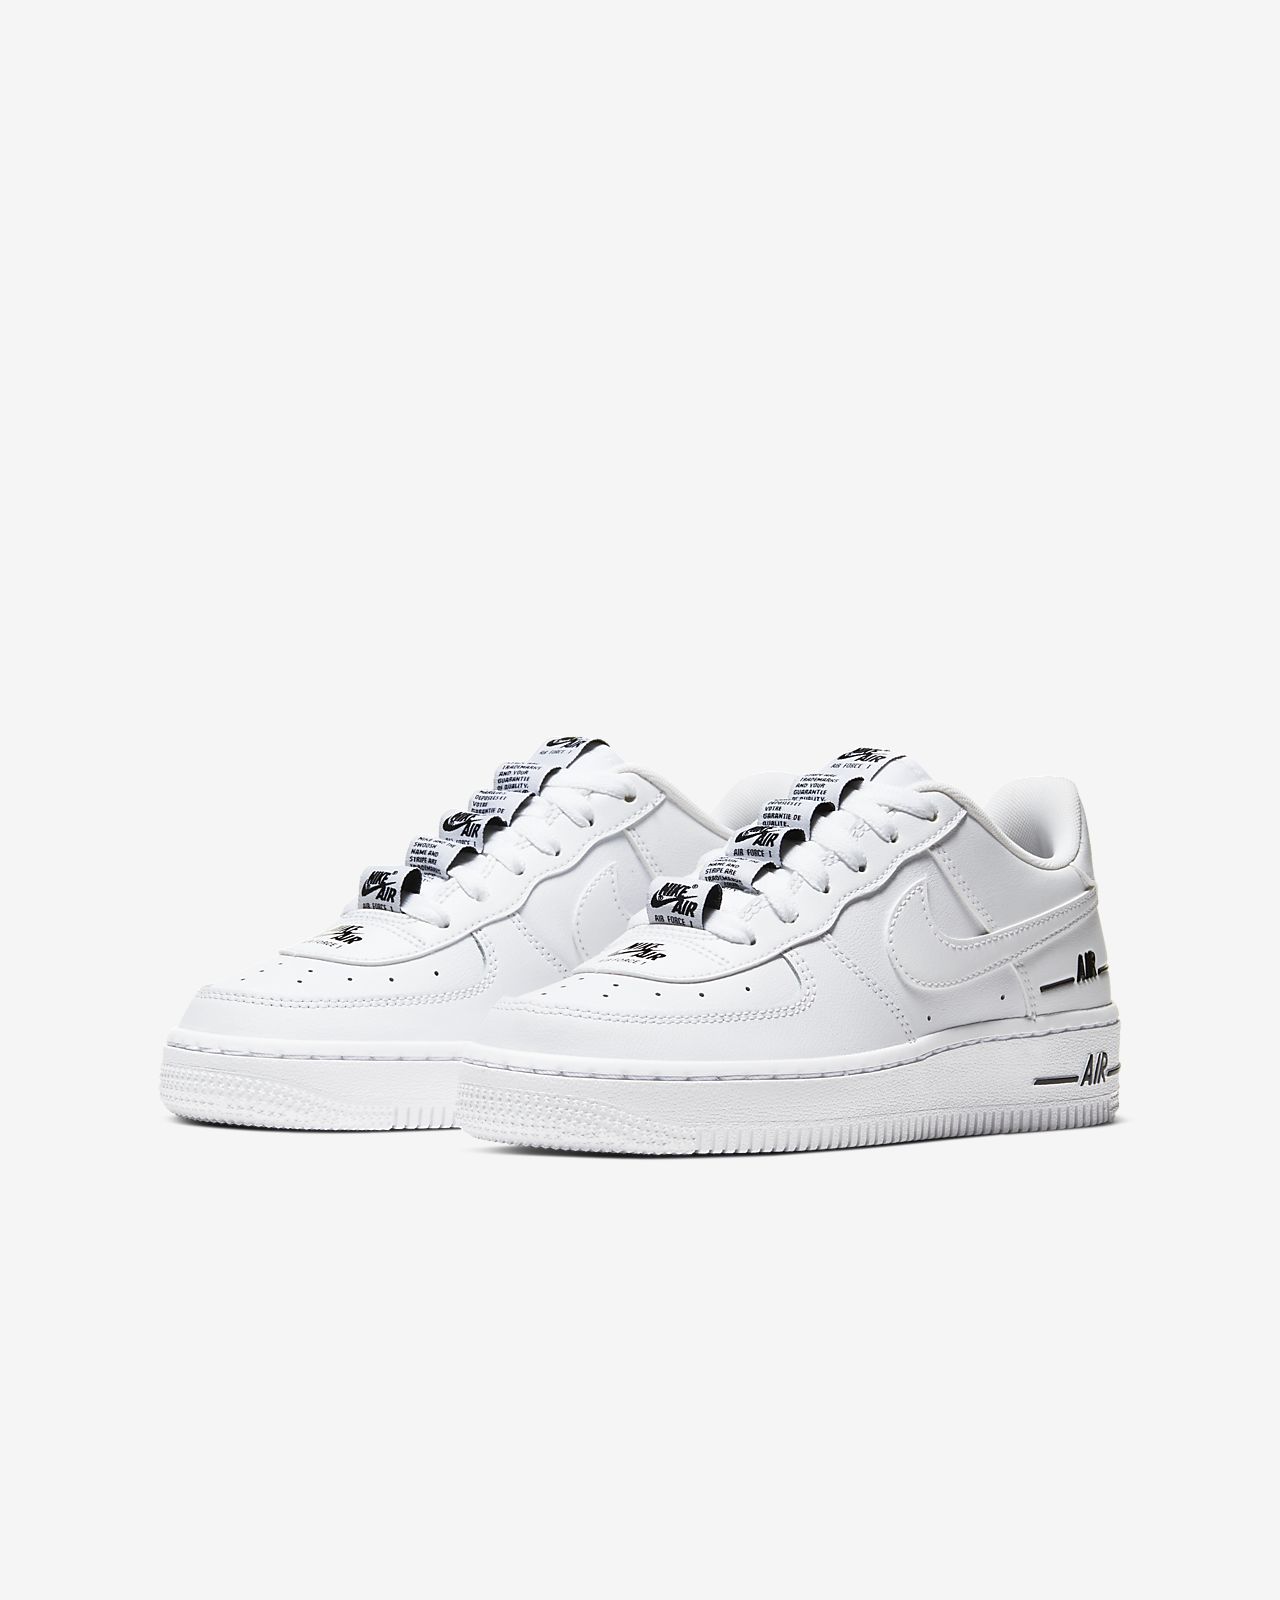 nike light grey air force 1 lv8 3 trainers junior